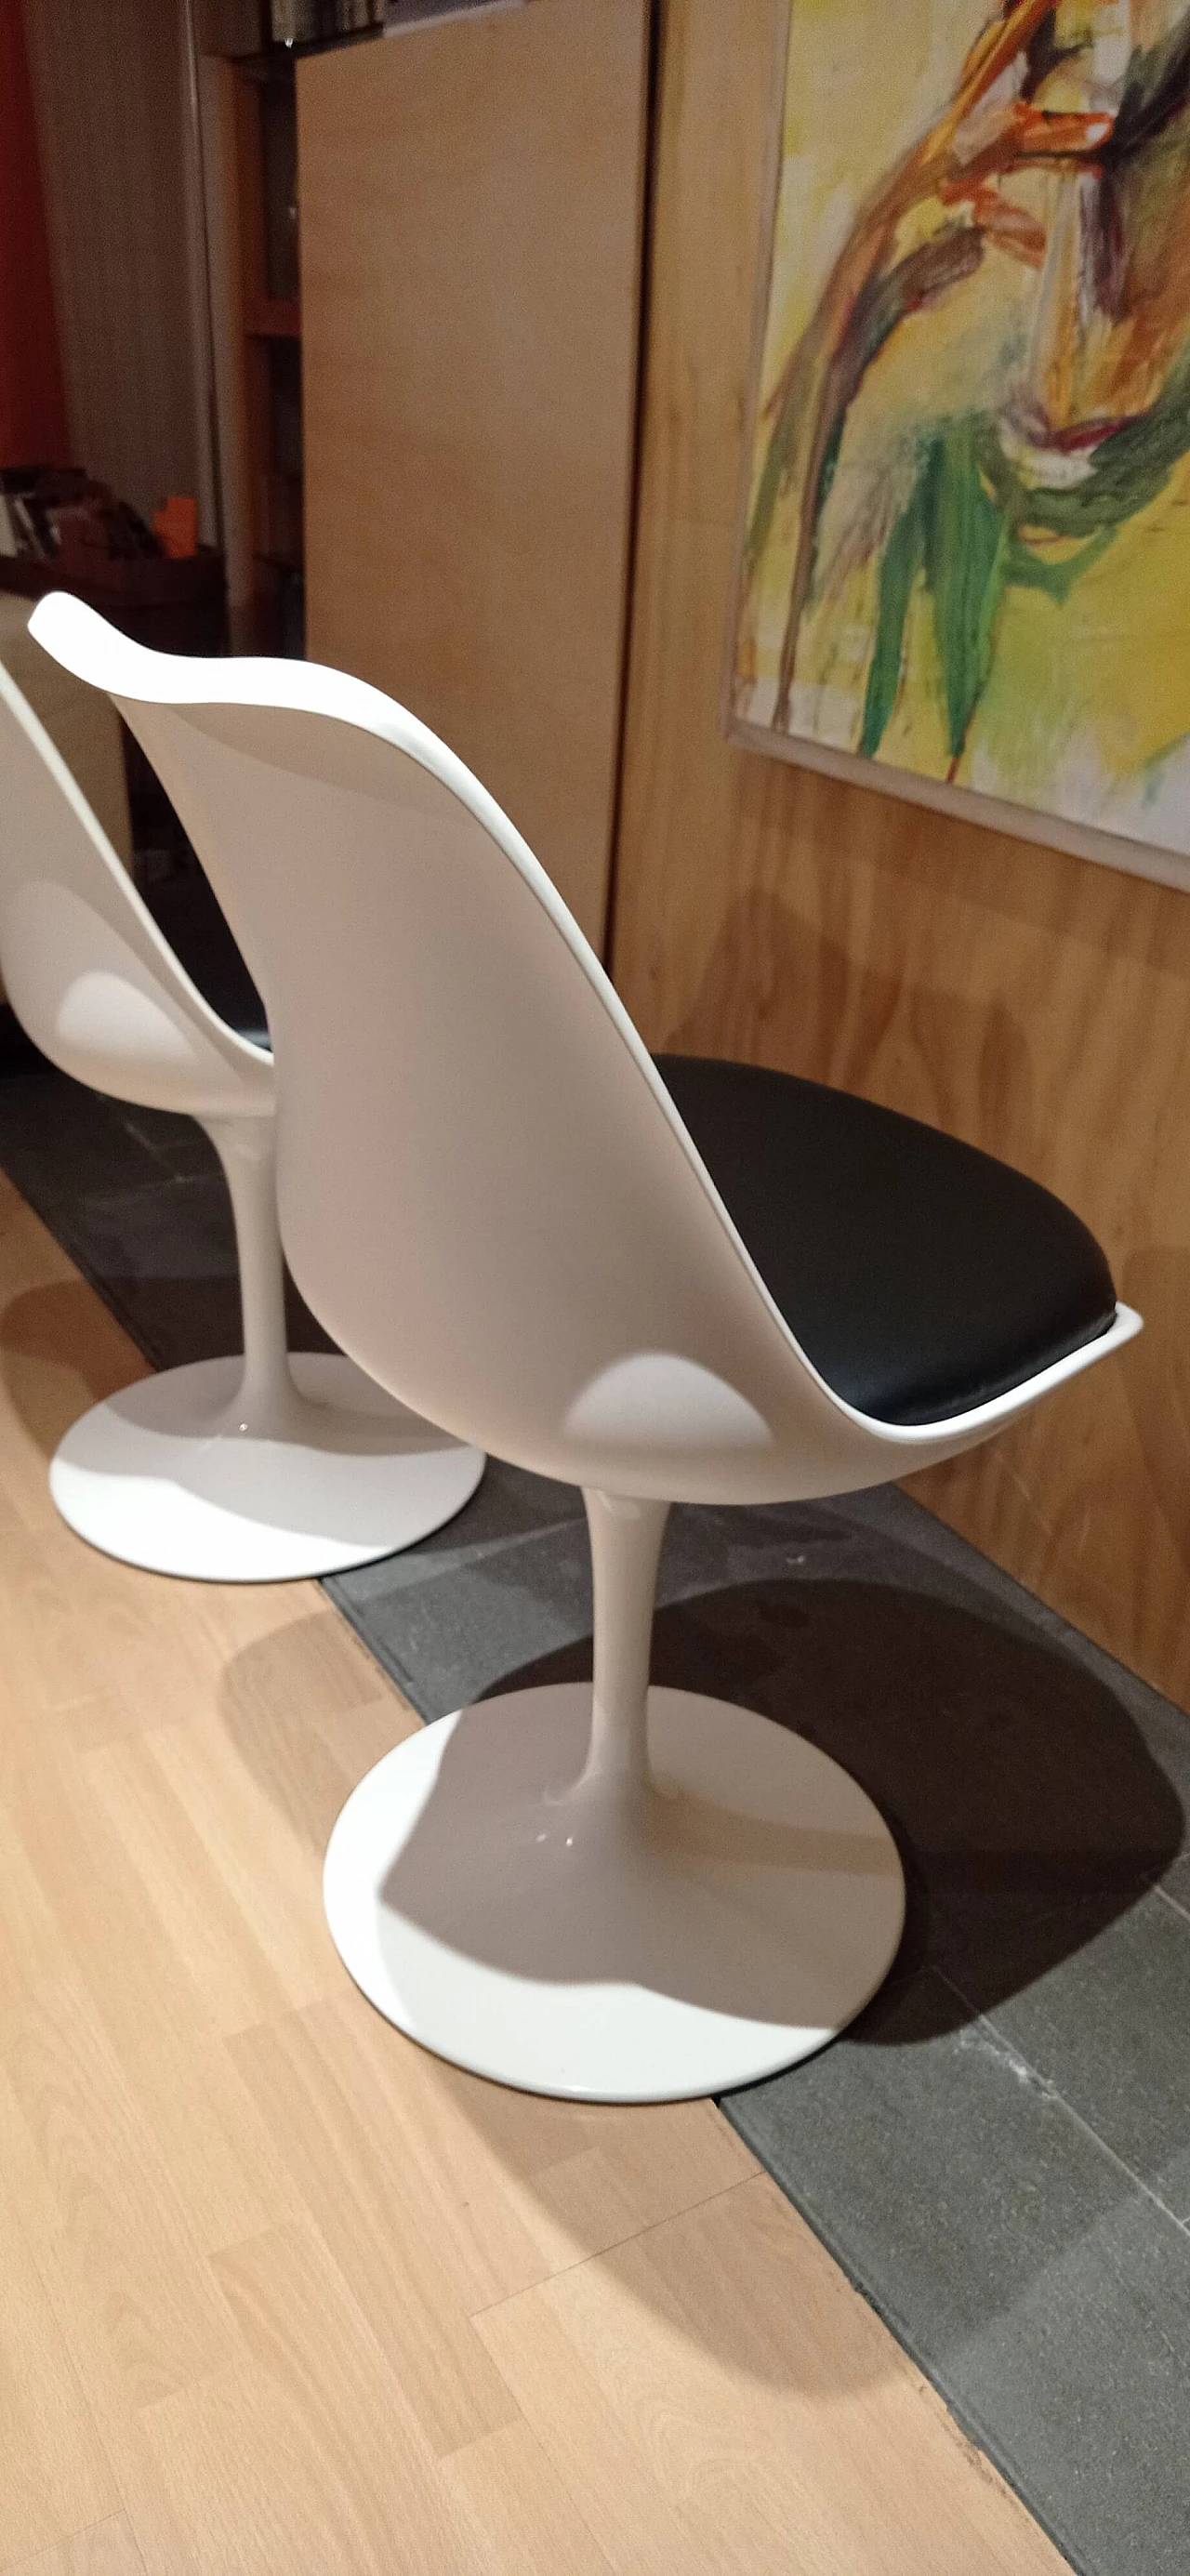 Pair of white Tulip 769-S chairs with black leather cushion by Eero Saarinen for Alivar, 1990s 79